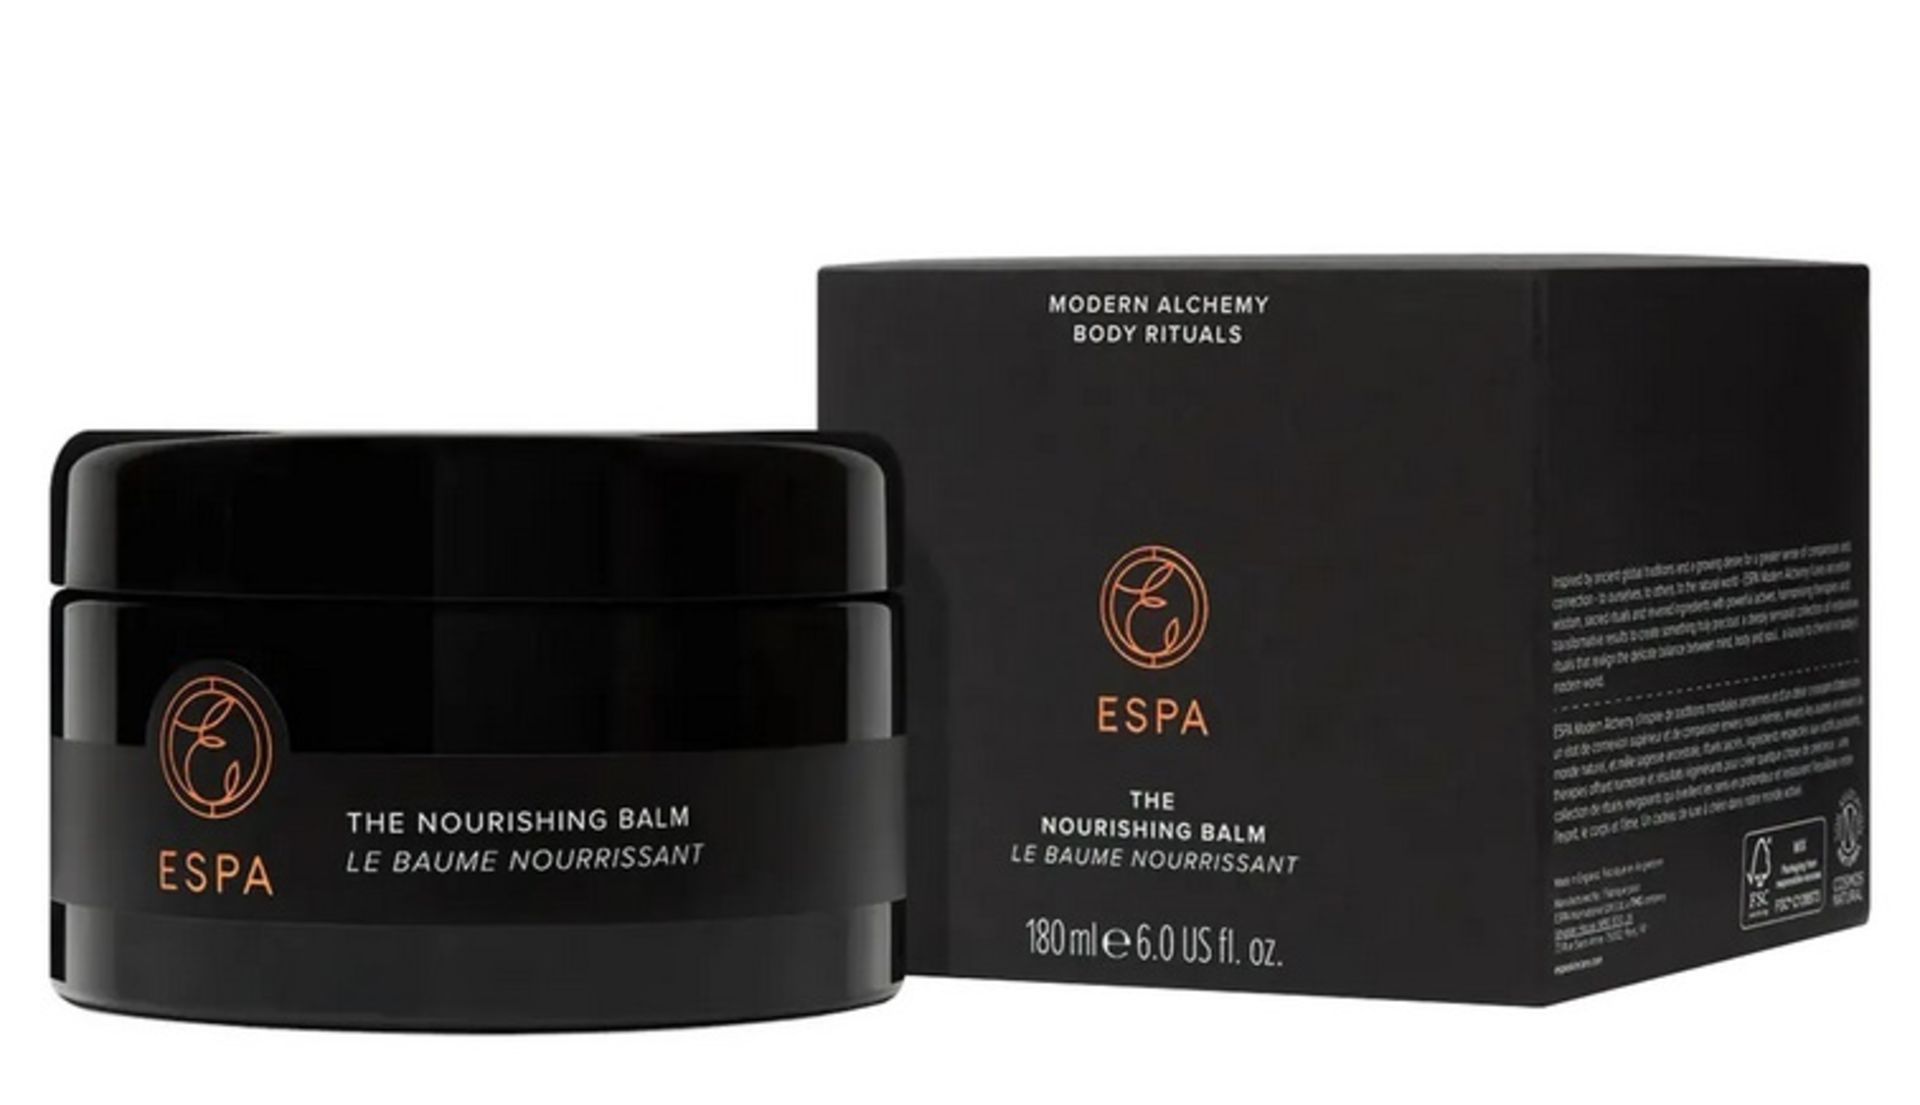 4x NEW & BOXED ESPA The Nourishing Balm 180ml. RRP £80 each. (R12-11/16). Inspired by the